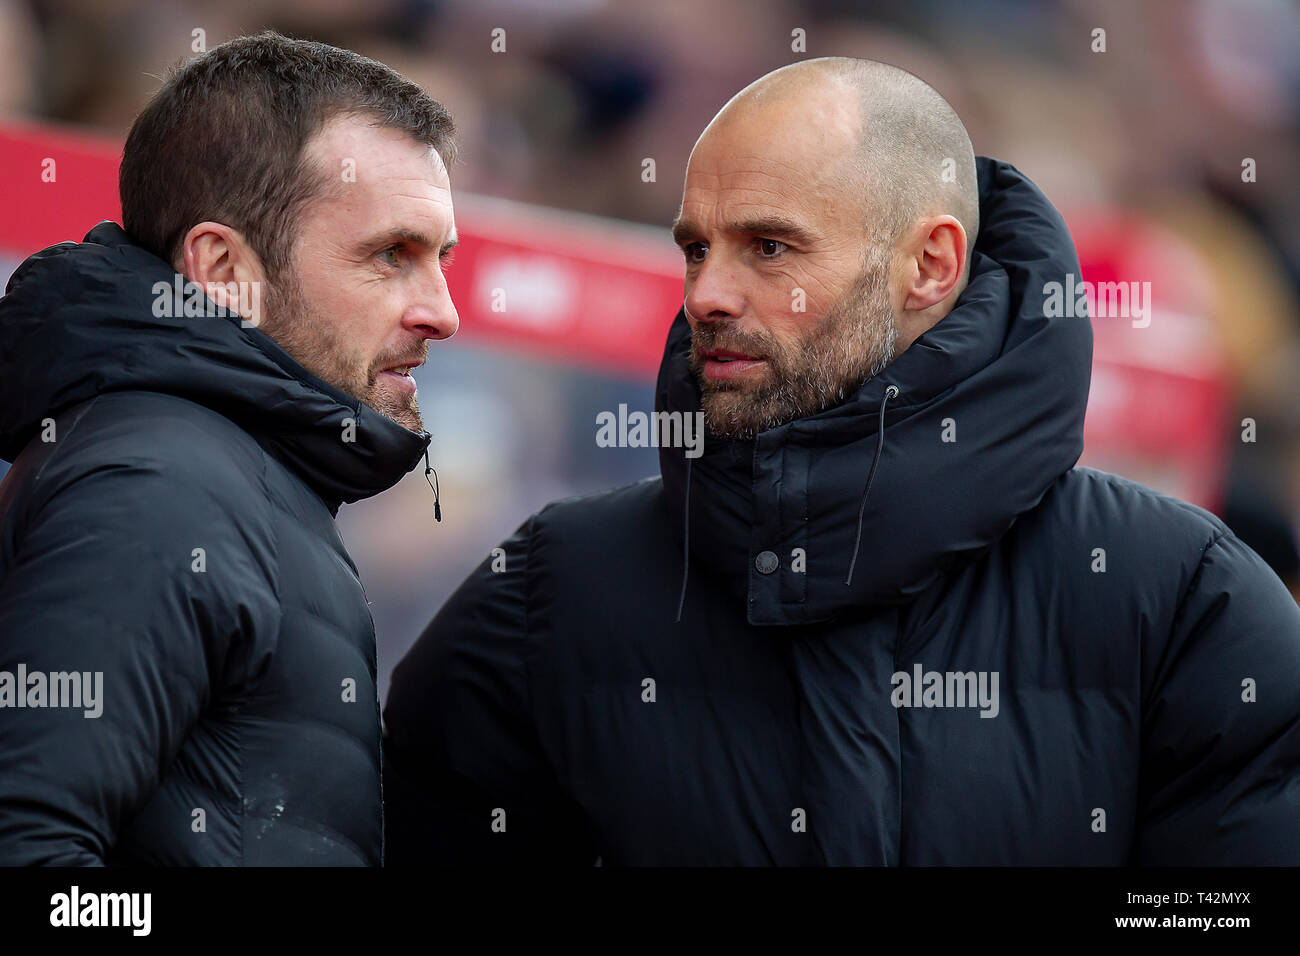 Stoke on Trent , UK. 13th April 2019.      Nathan Jones Manager of Stoke City talking with good friend Paul Warne Manager of Rotherham United during the Sky Bet Championship match between Stoke City and Rotherham United at the Britannia Stadium, Stoke-on-Trent on   Editorial use only, license required for commercial use. No use in betting, games or a single club/league/player publications. Photograph may only be used for newspaper and/or magazine editorial purposes. May not be used for publications involving 1 player, 1 club or 1 compet Credit: MI News & Sport /Alamy Live News Stock Photo